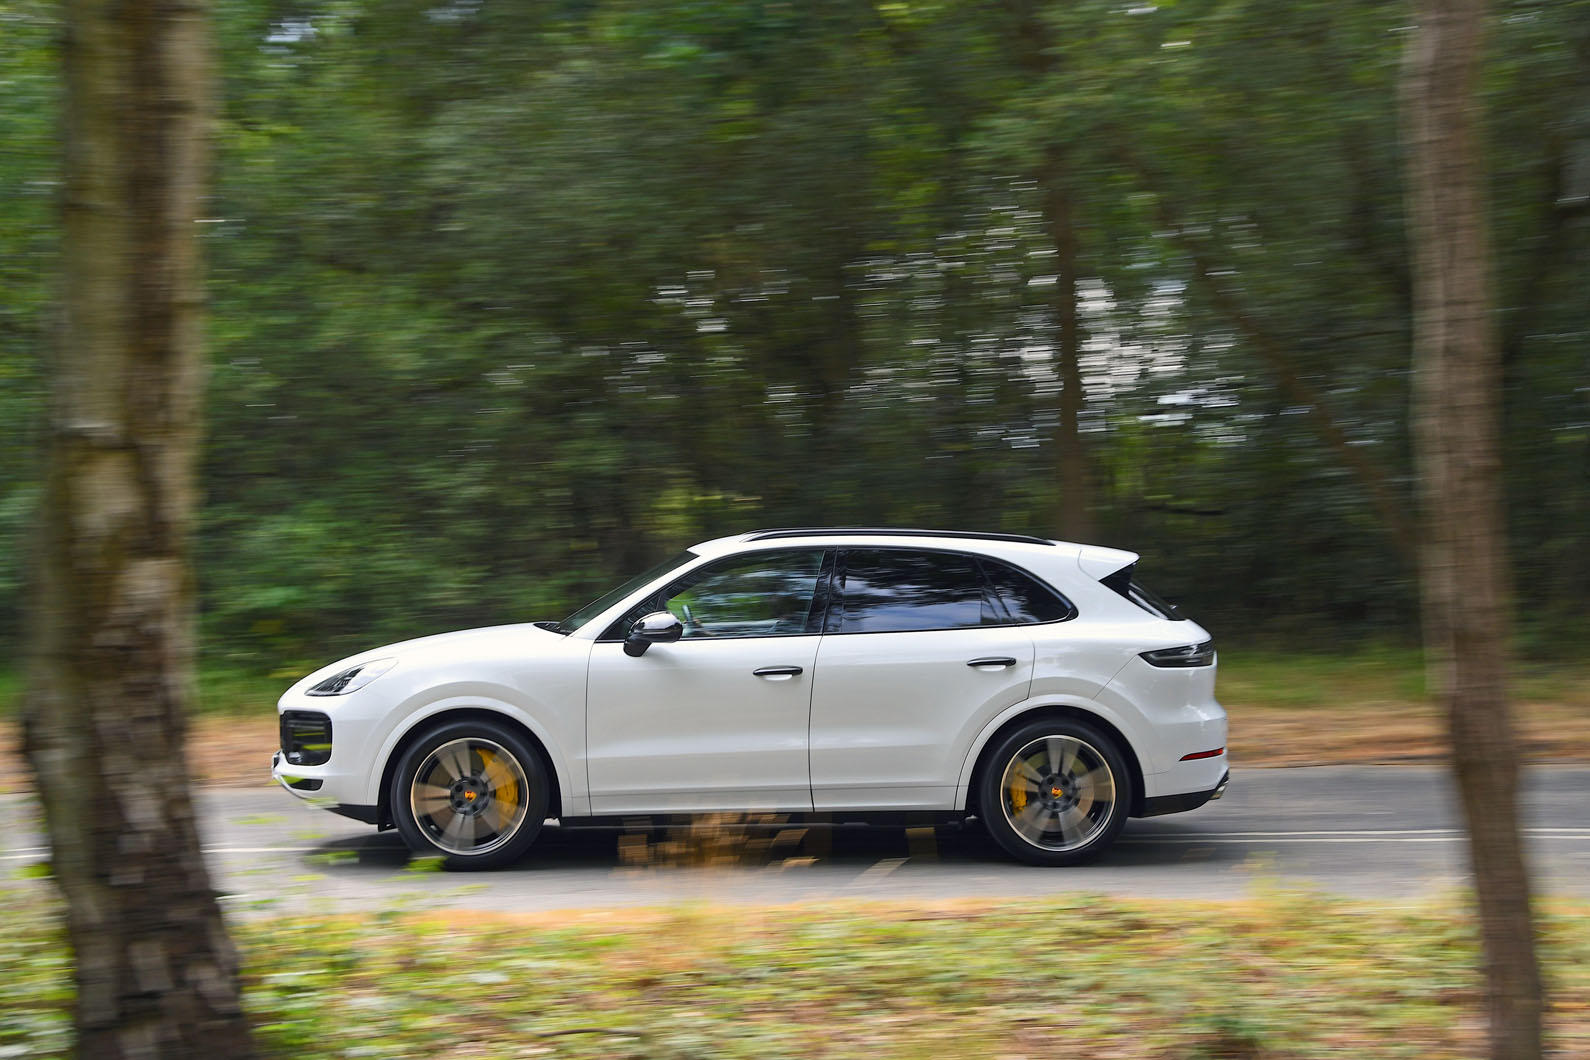 Porsche Cayenne Turbo 2018 road test review on the road side